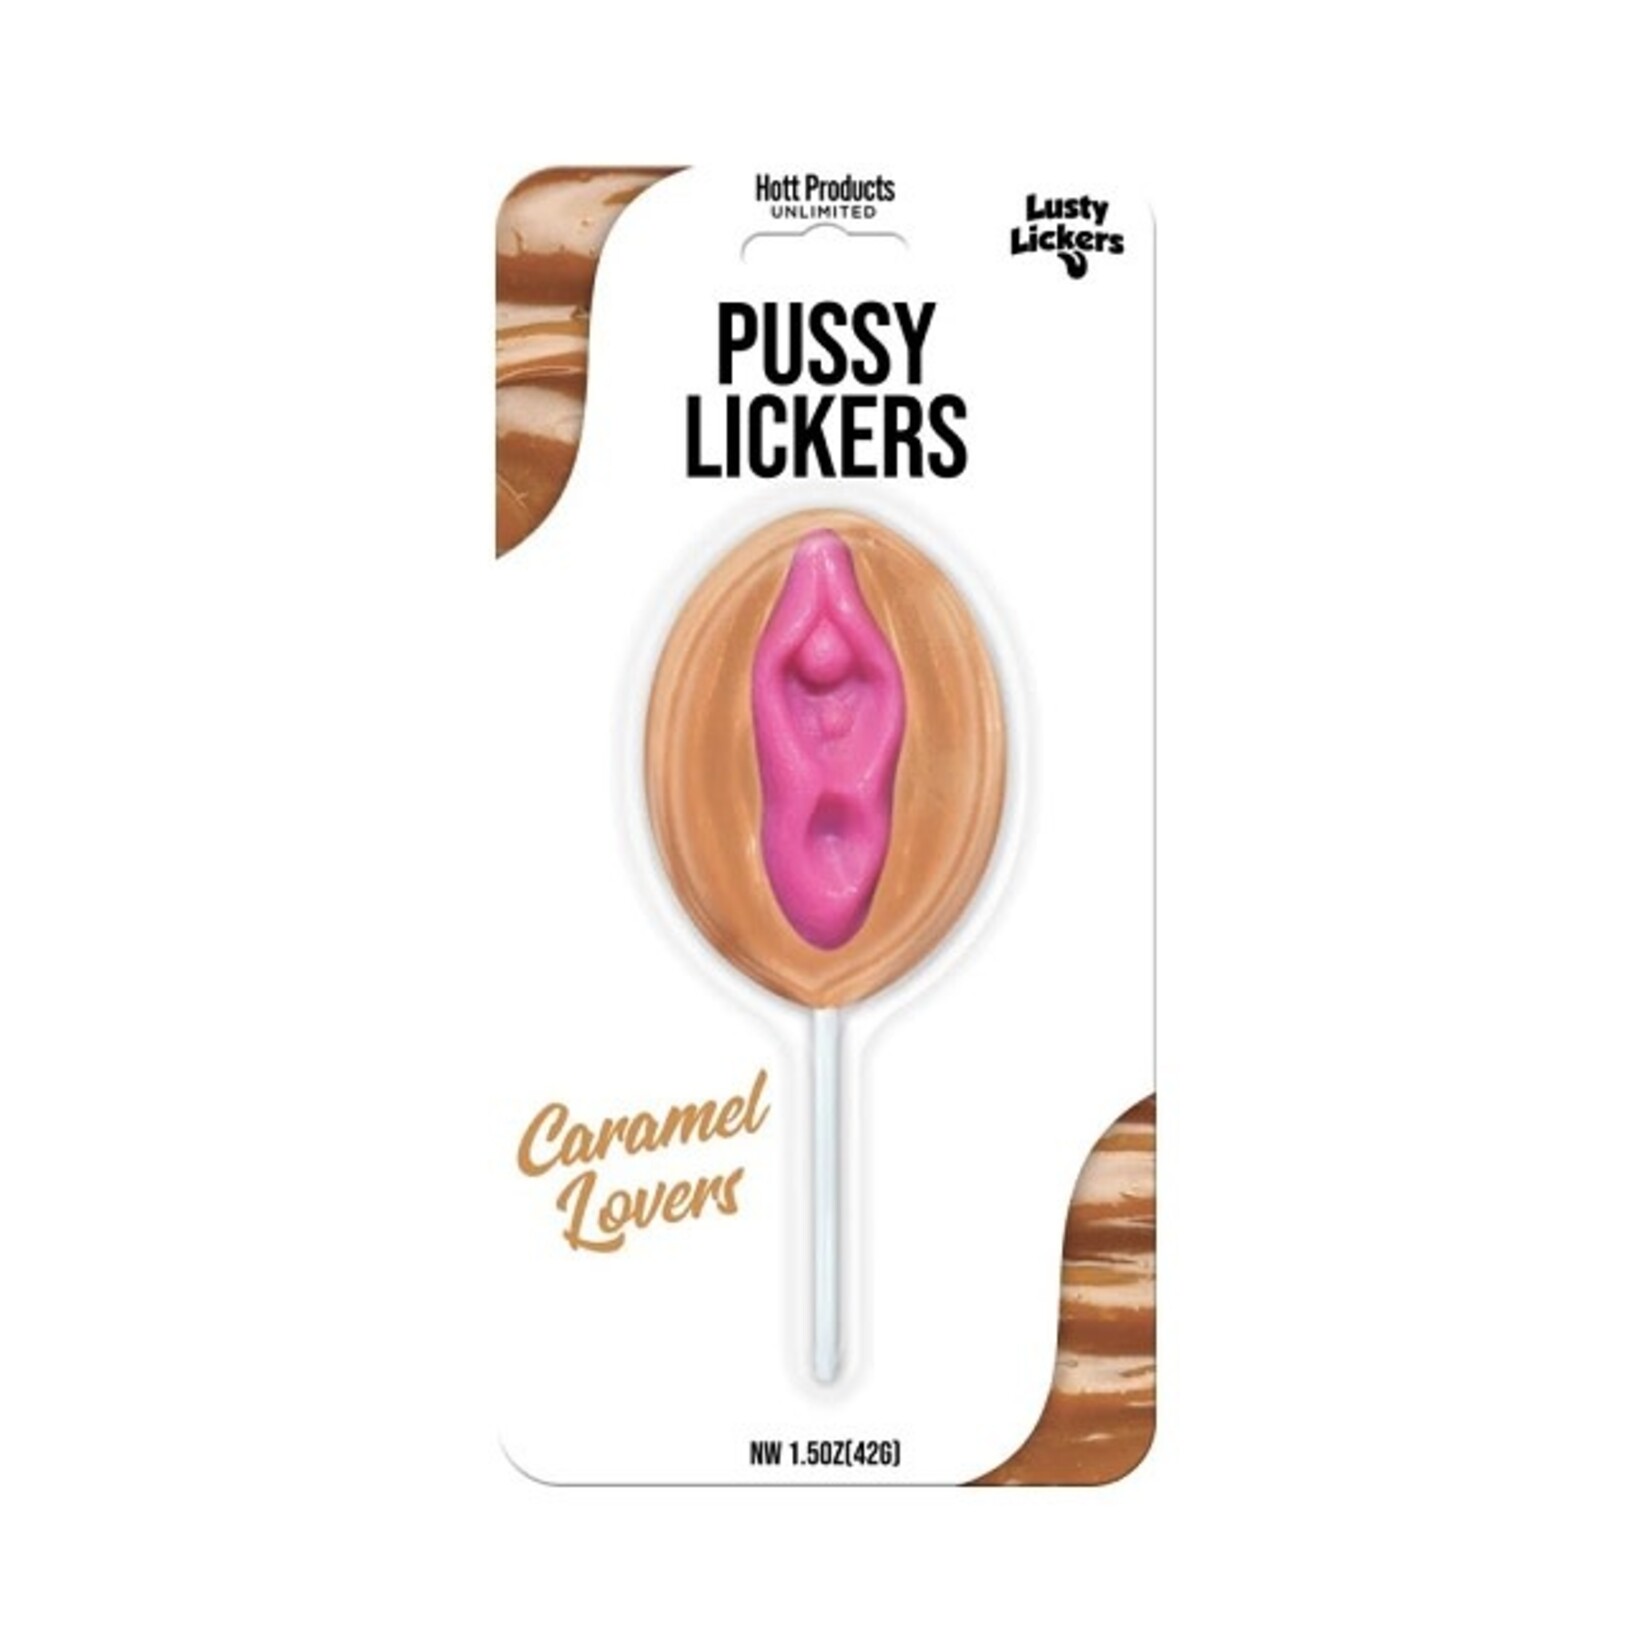 Hott Products Lusty Lickers Pussy Lickers Caramel Lovers